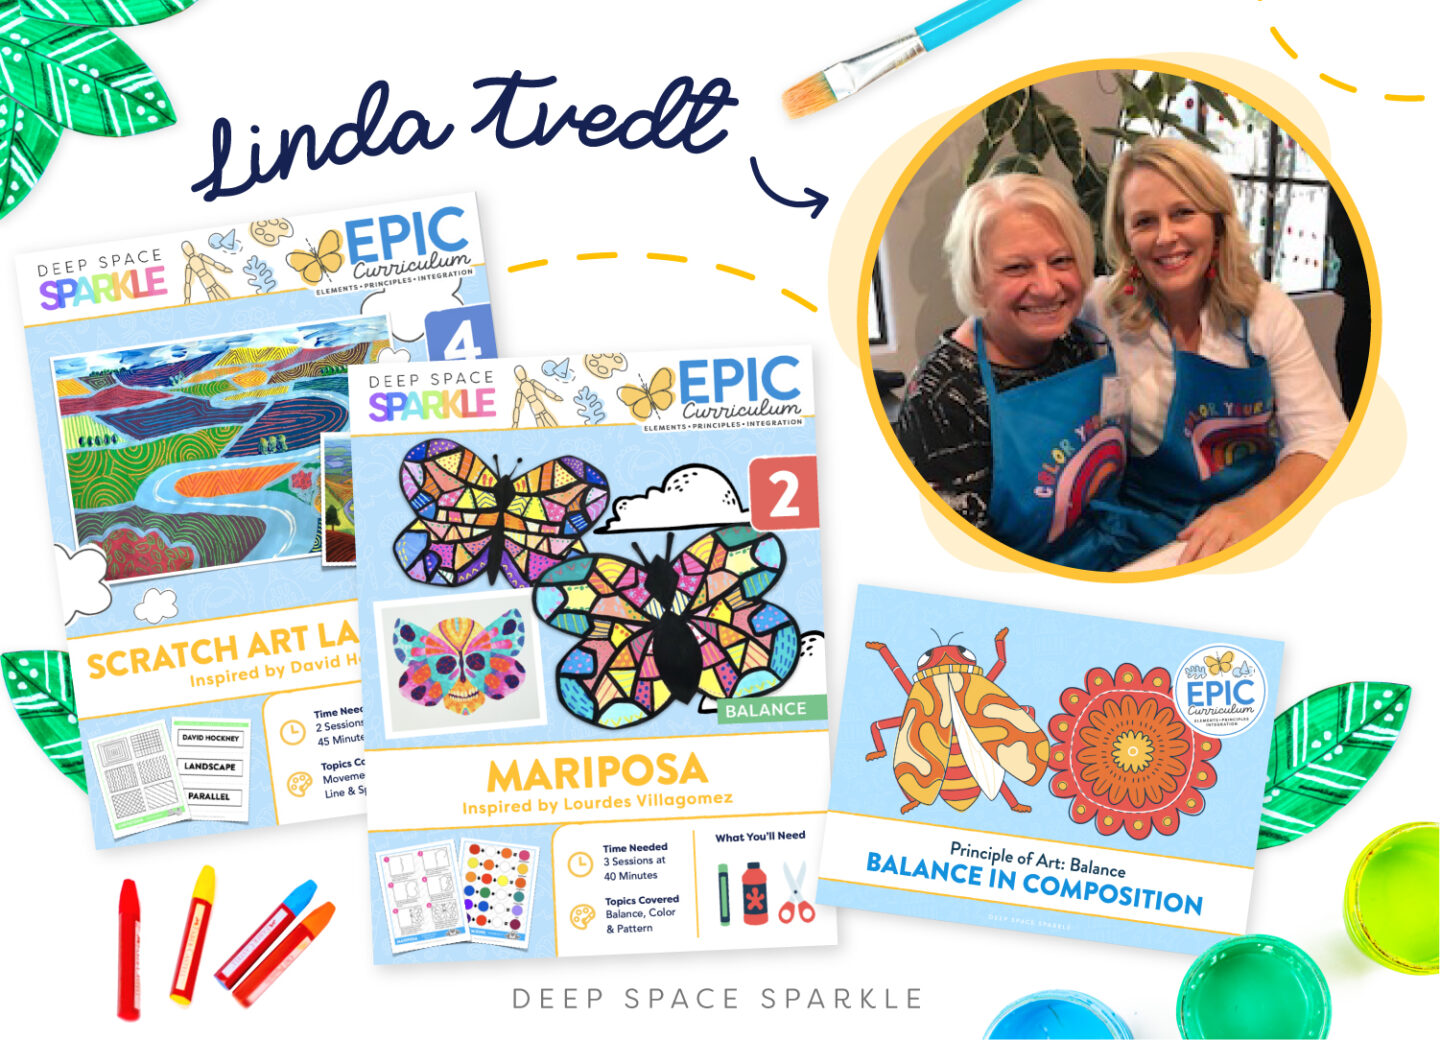 Linda Sparkler Stories What the Membership is all About